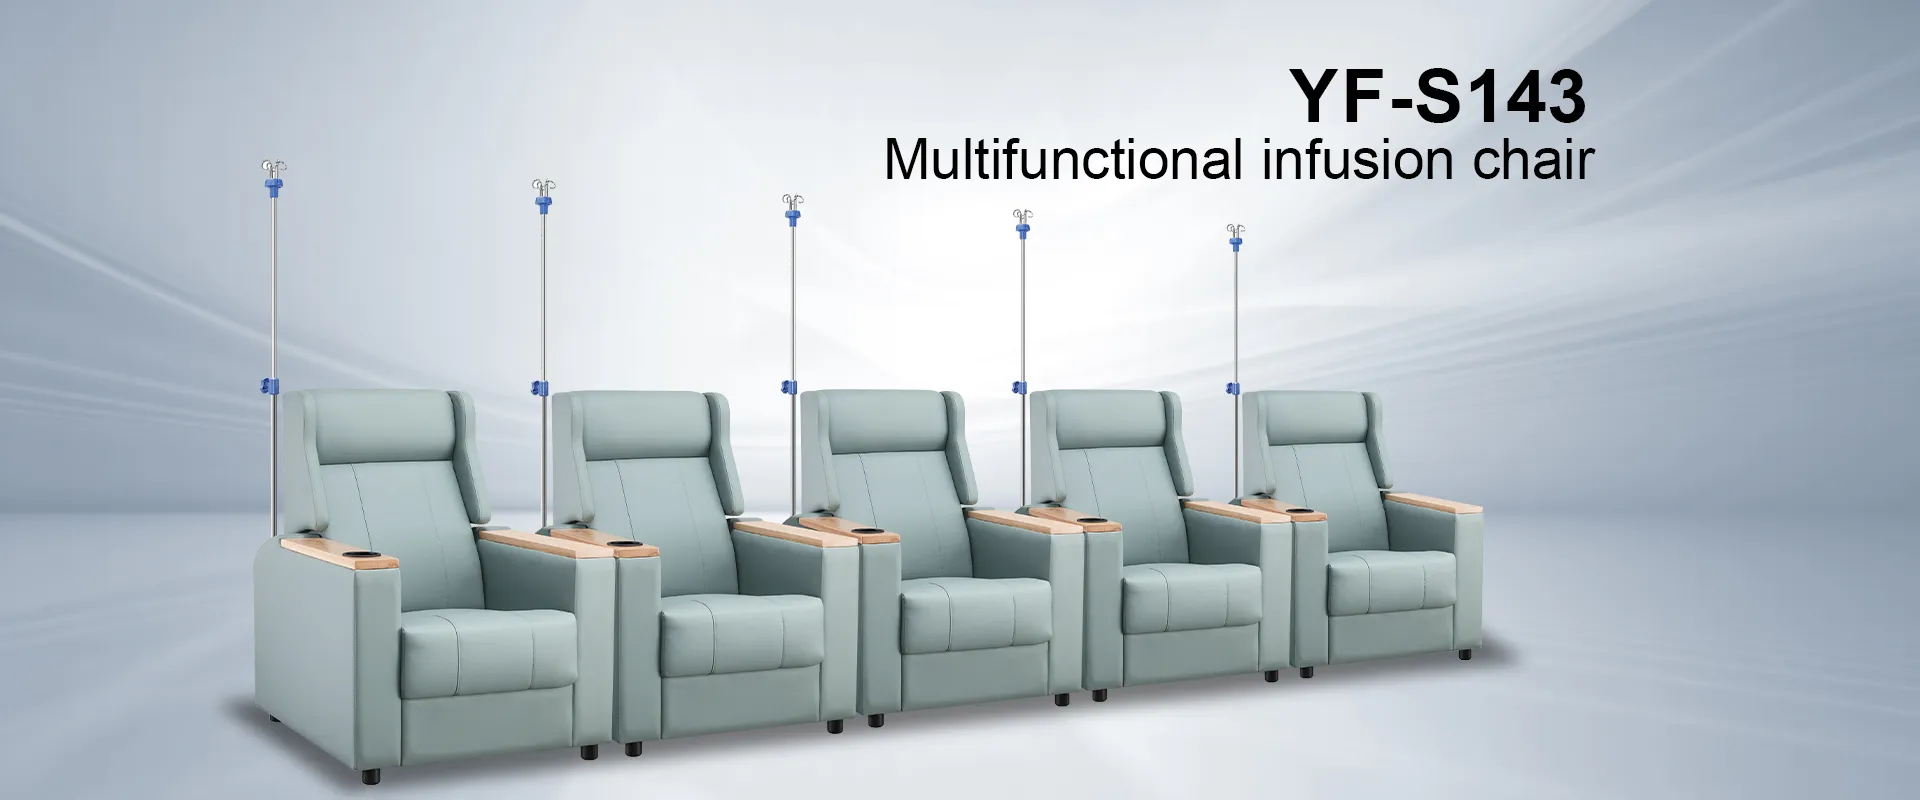 Wholesale Multifunctional Infusion Chair From China